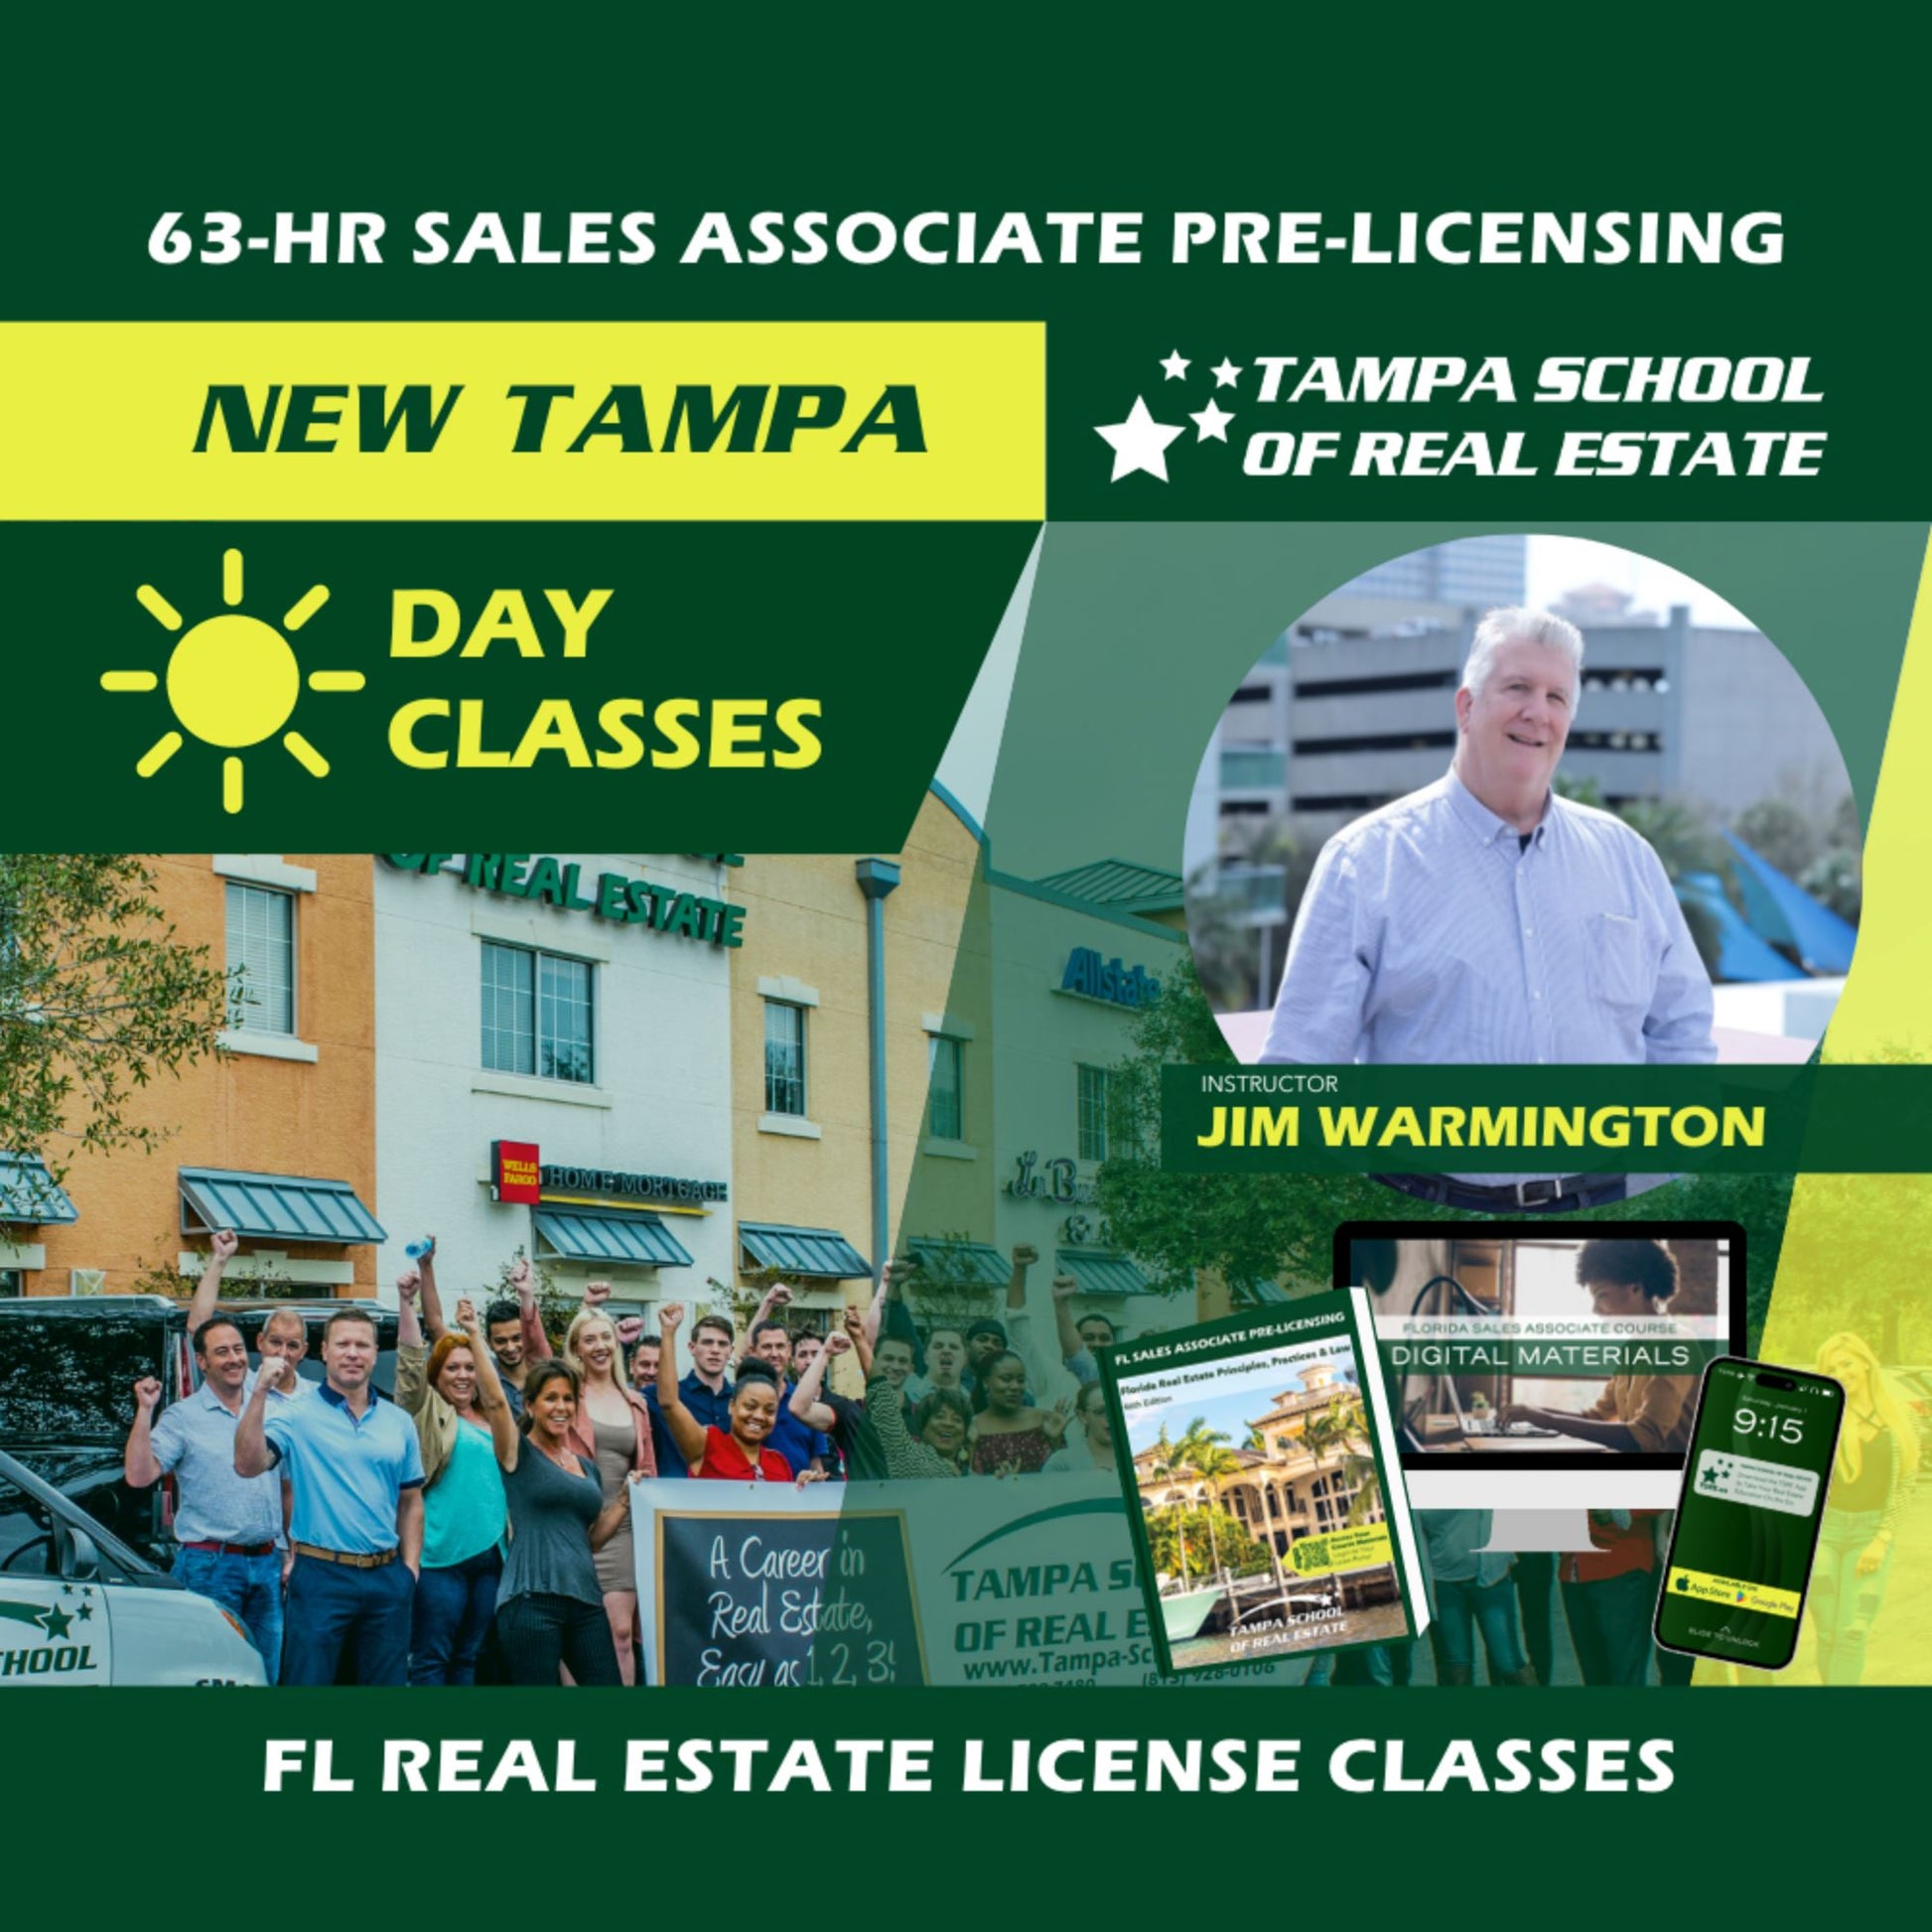 New Tampa | Oct 23 8:30am | 63-HR FL Real Estate Classes SLPRE TSRE New Tampa | Tampa School of Real Estate 